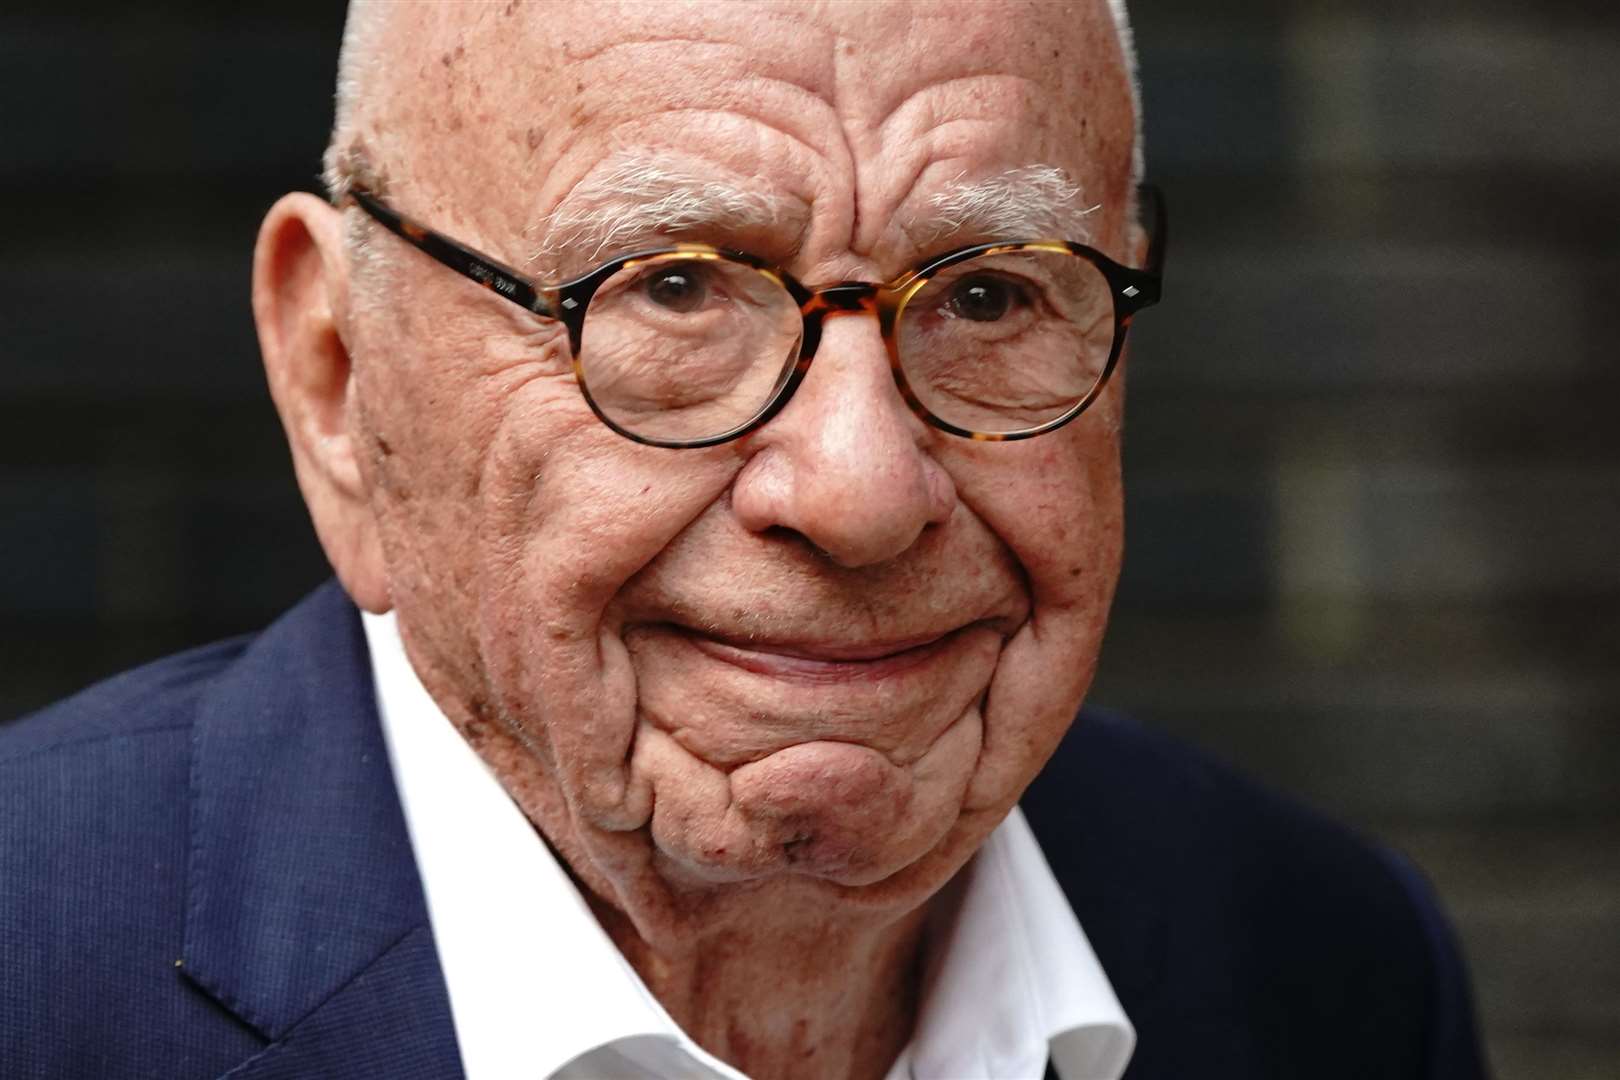 Rupert Murdoch is stepping back after decades at the helm (Victoria Jones/PA)